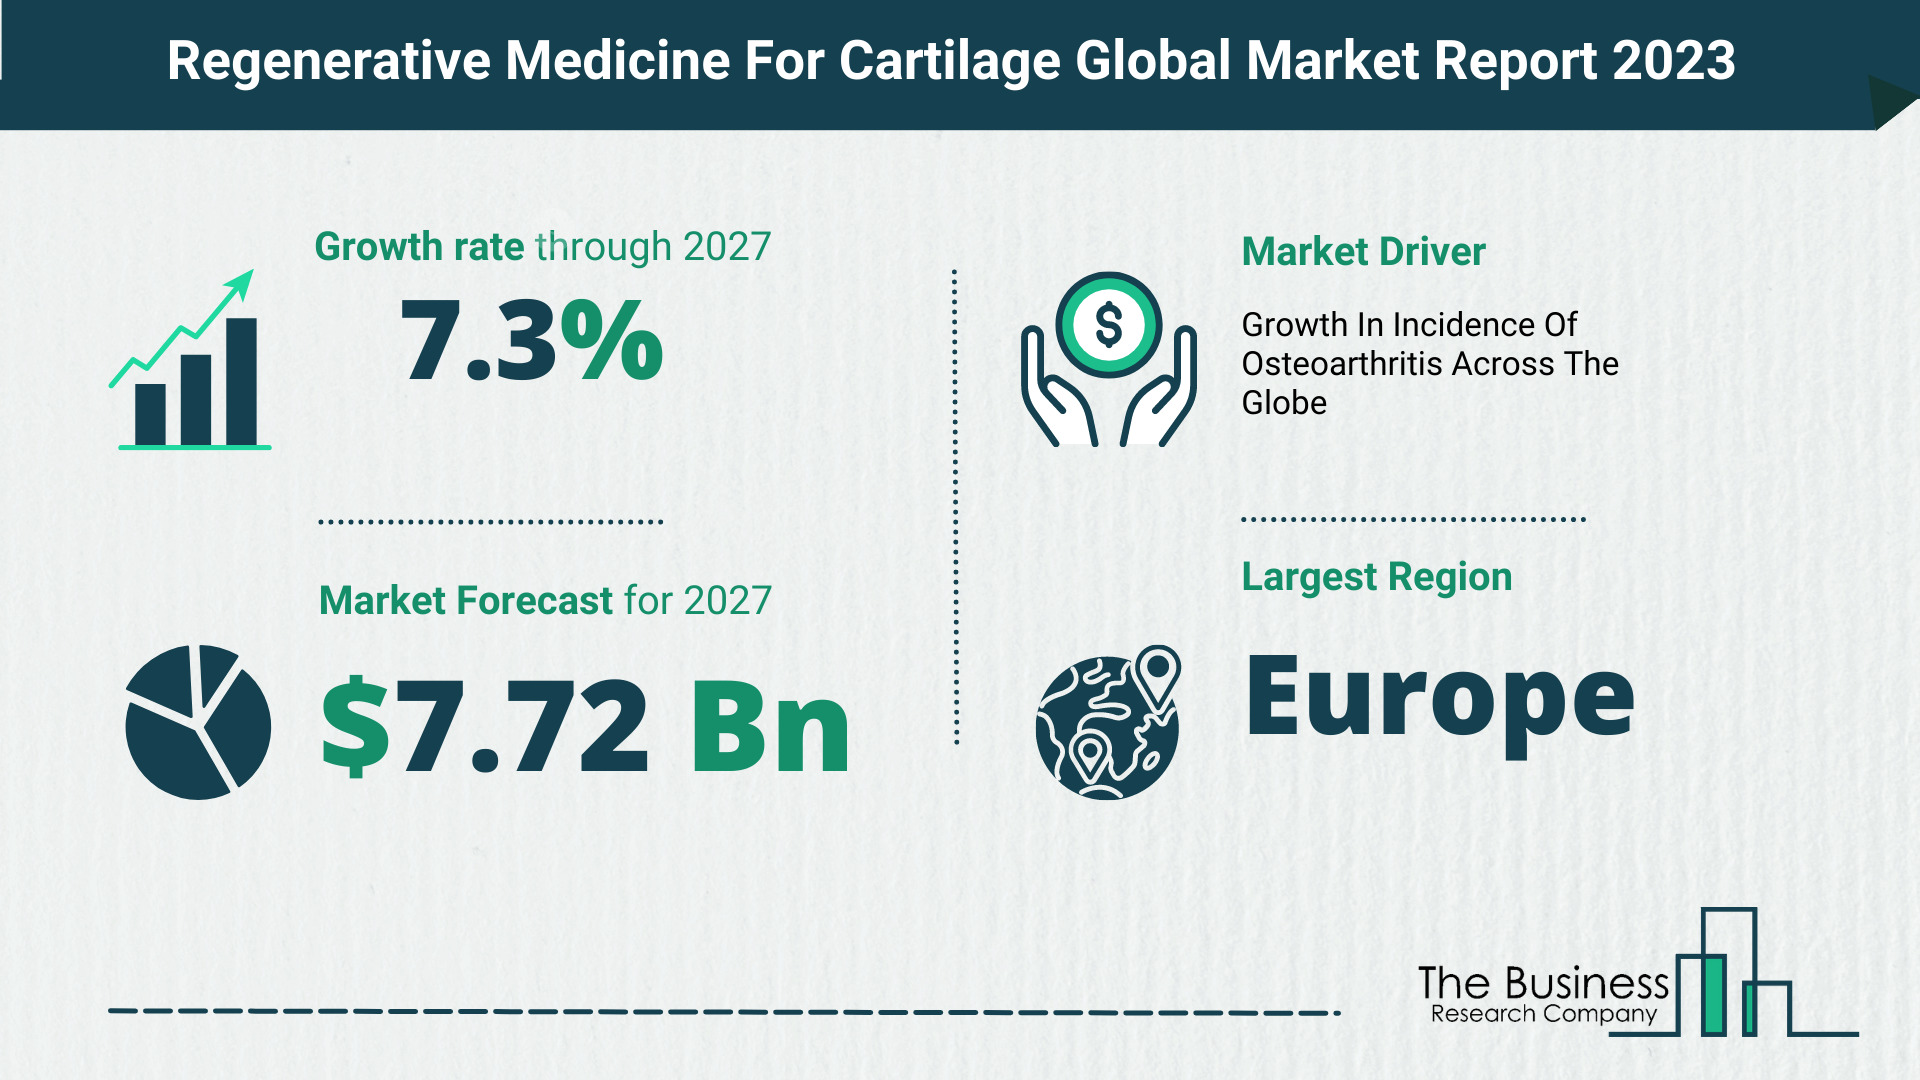 How Will The Regenerative Medicine For Cartilage Market Globally Expand In 2023?